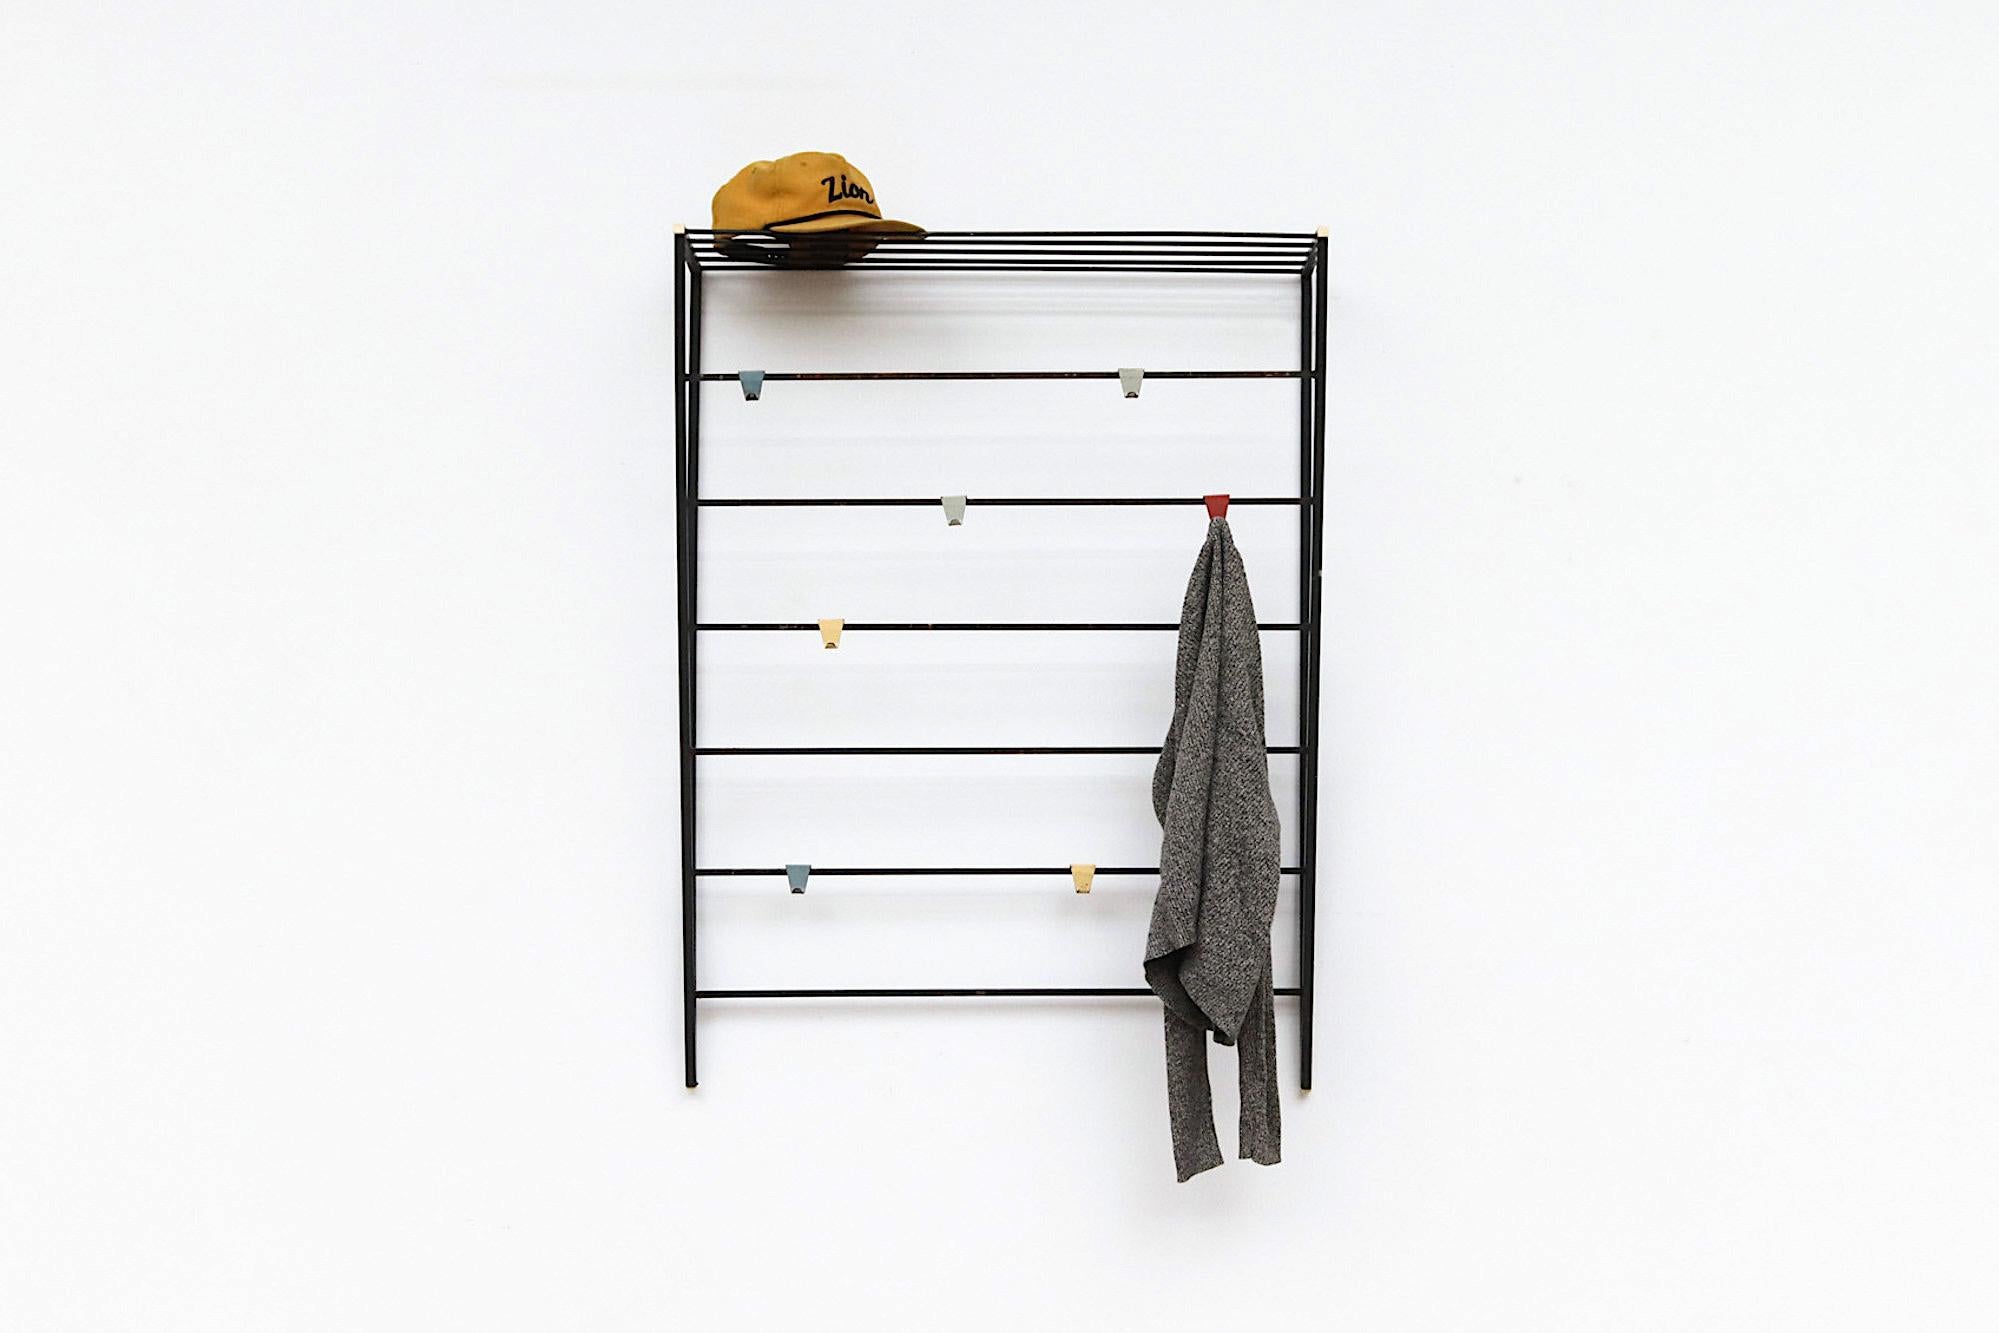 Triangular shaped black enameled metal wall mount coat rack with multi-colored hooks, and built in hat rack. In original condition with visible wear, including rust. Wear is consistent with its age and use. Others available in varying sizes